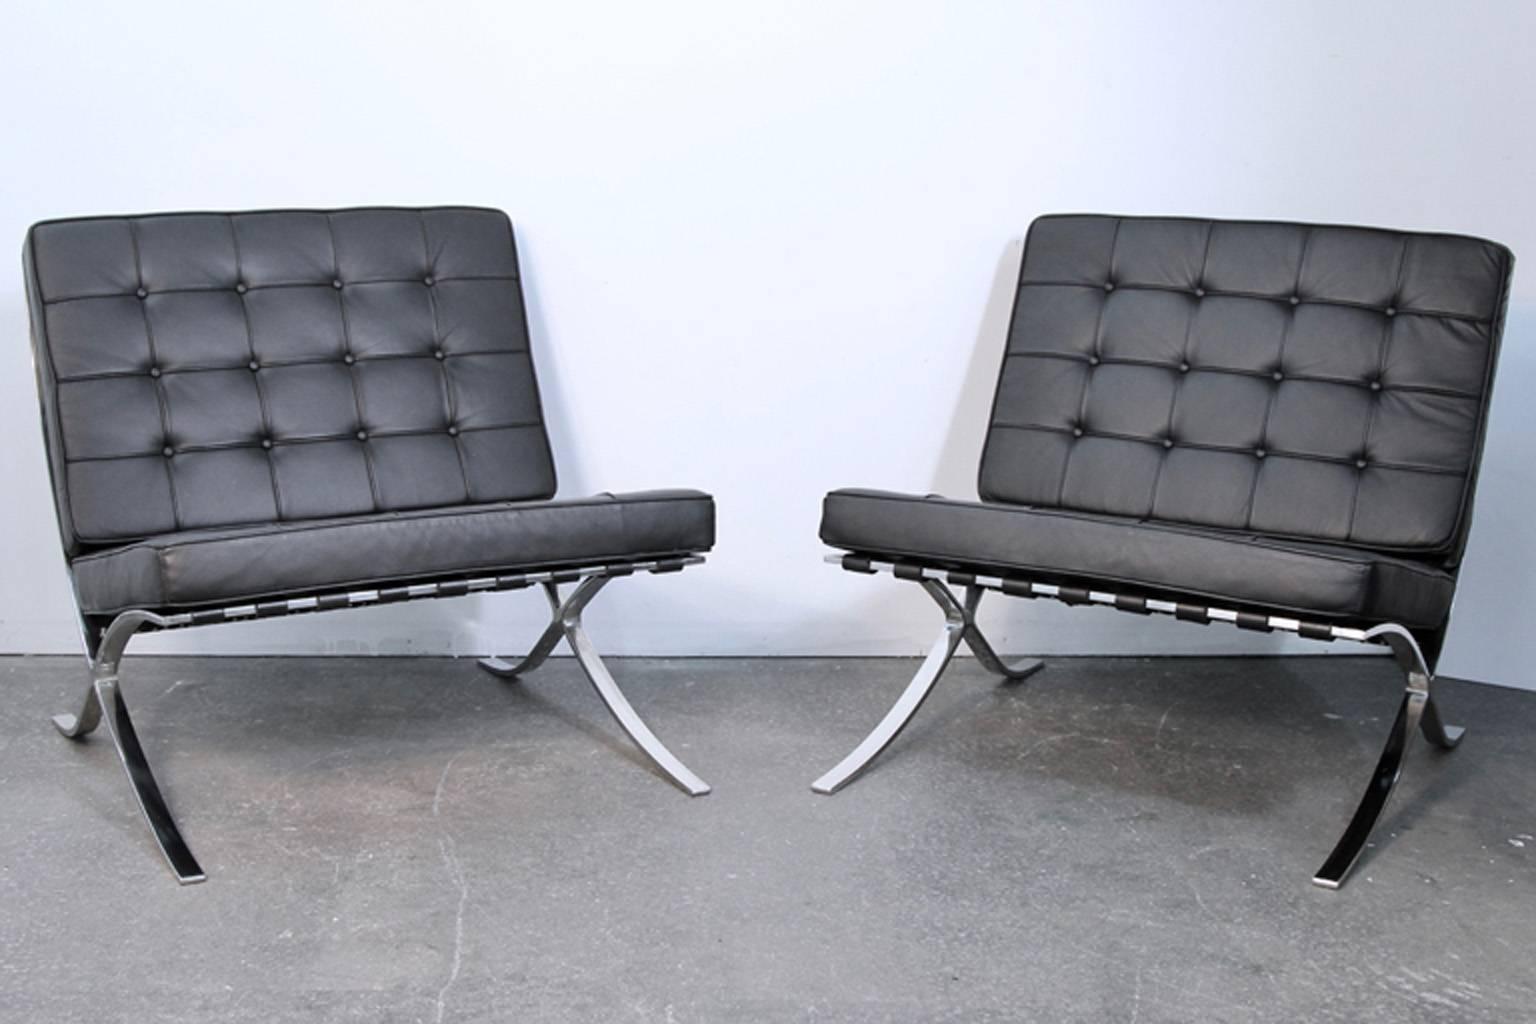 Pair of black leather Barcelona chairs in the manner of Mies Van Der Rohe. These are heavy chrome frame Barcelona chairs, but not know whether they were produced by knoll. No markings or tags. They are a high quality pair of chairs in excellent